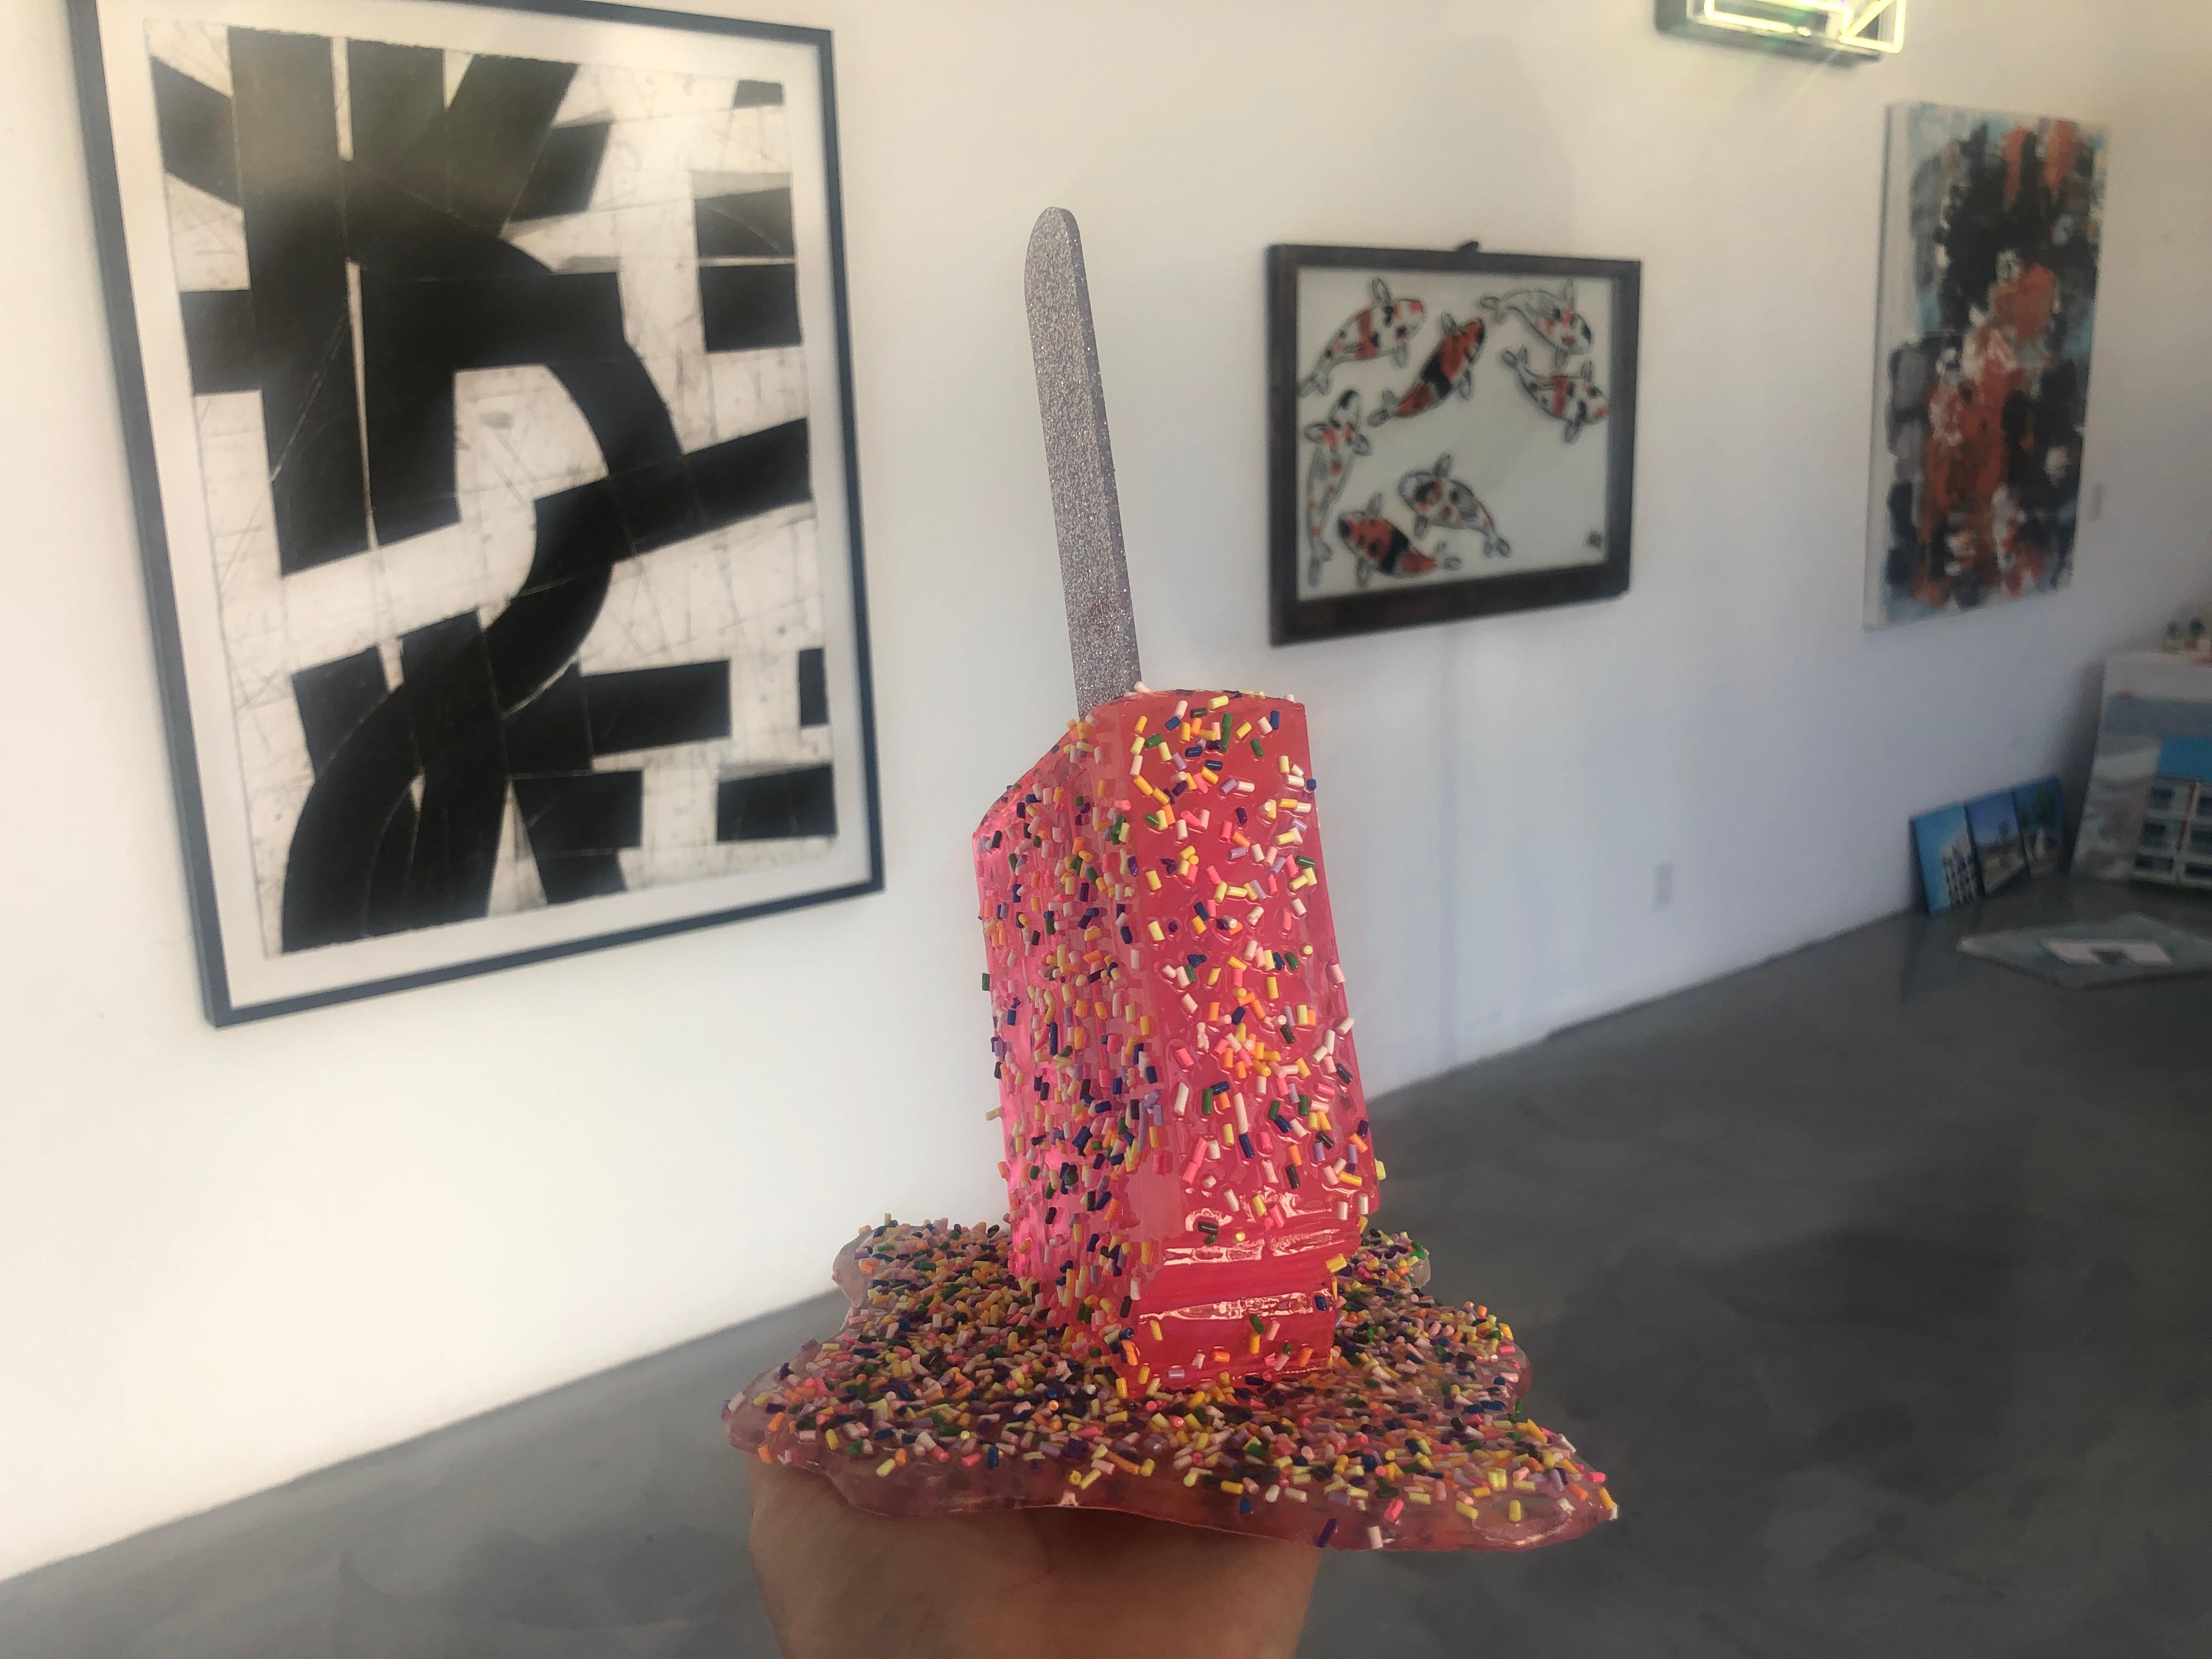  This is a one-of-a-kind resin sculpture by Betsy Enzensberger.

Betsy Enzensberger sculpts works that create a visceral longing and remembrance of the most nostalgic delights from childhood. The artist uses the familiarity of those sweet treats to